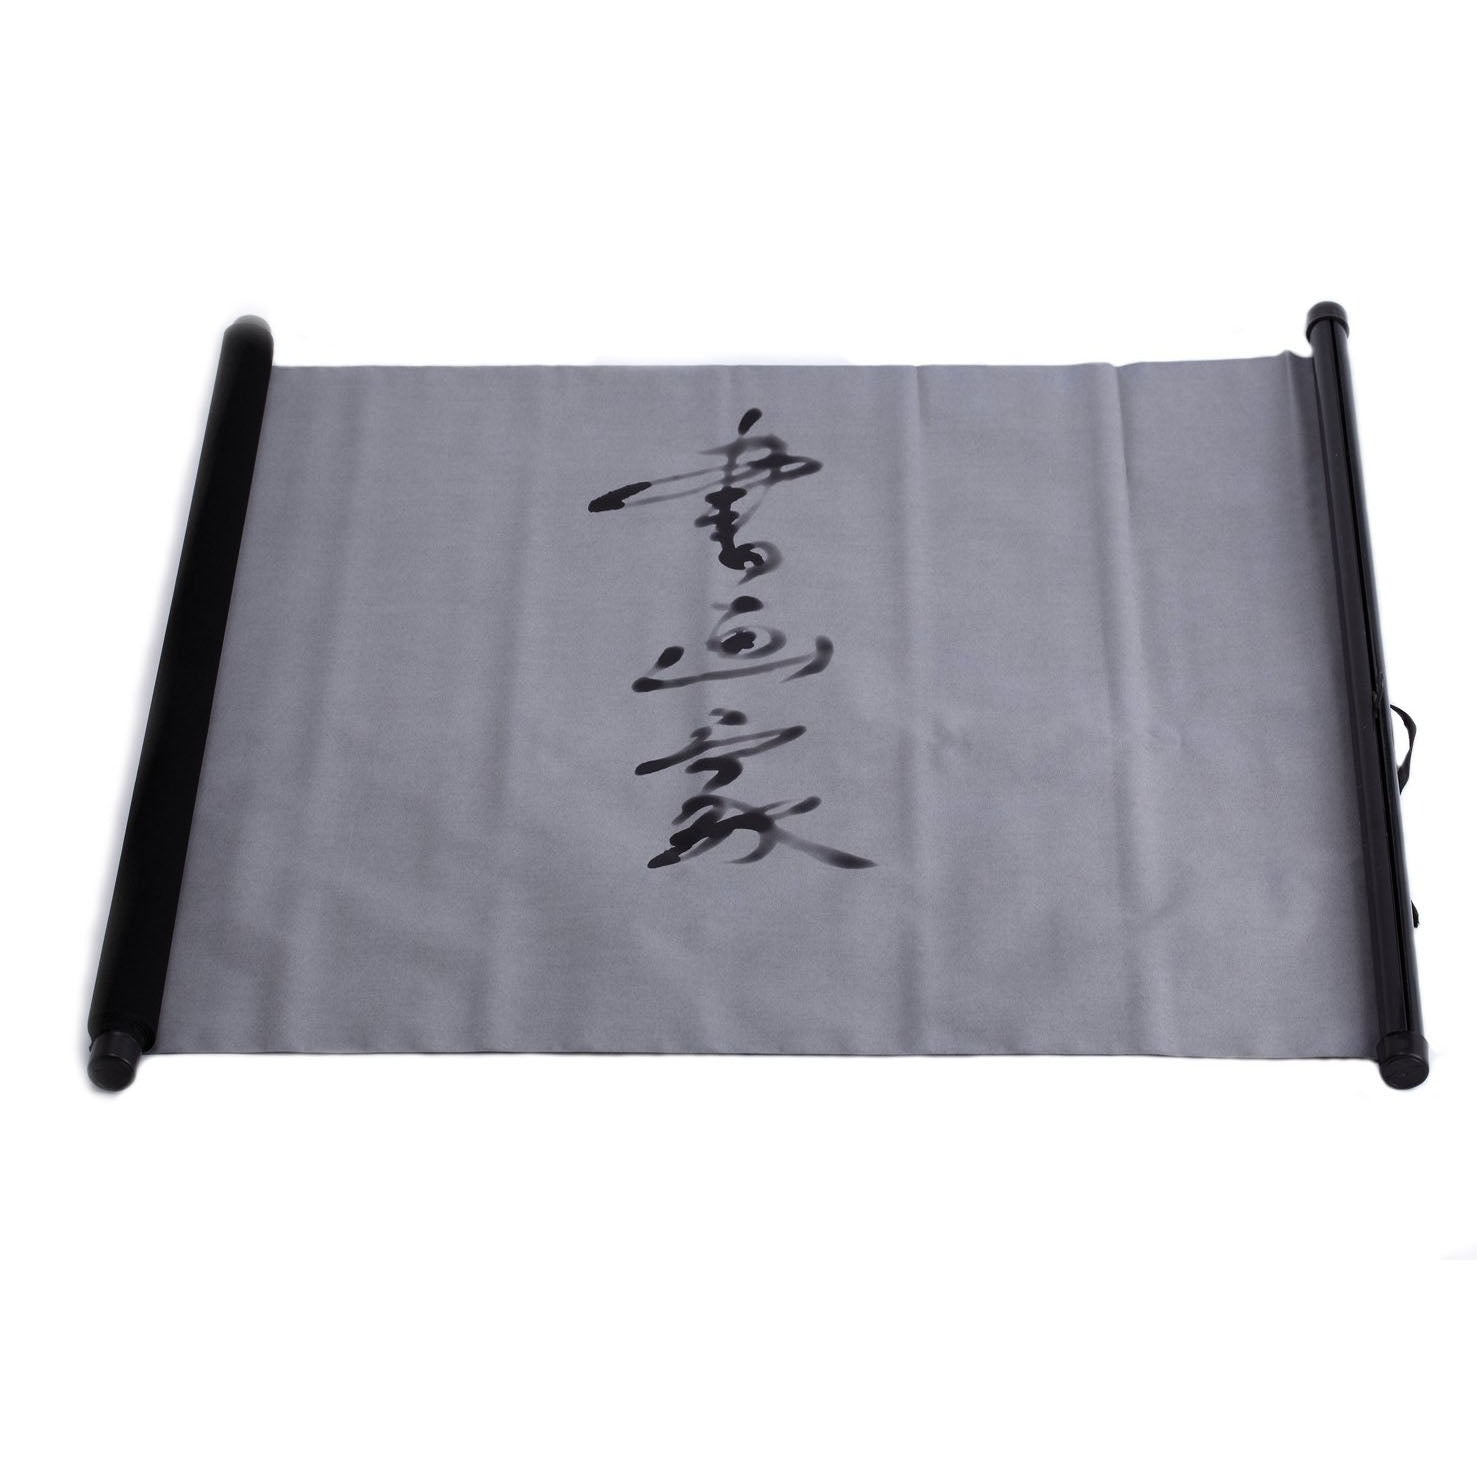 Meiyutang Xuan Paper(Shuan/Rice Paper) For Calligraphy Painting Practice  50sheets Half Ripe 601